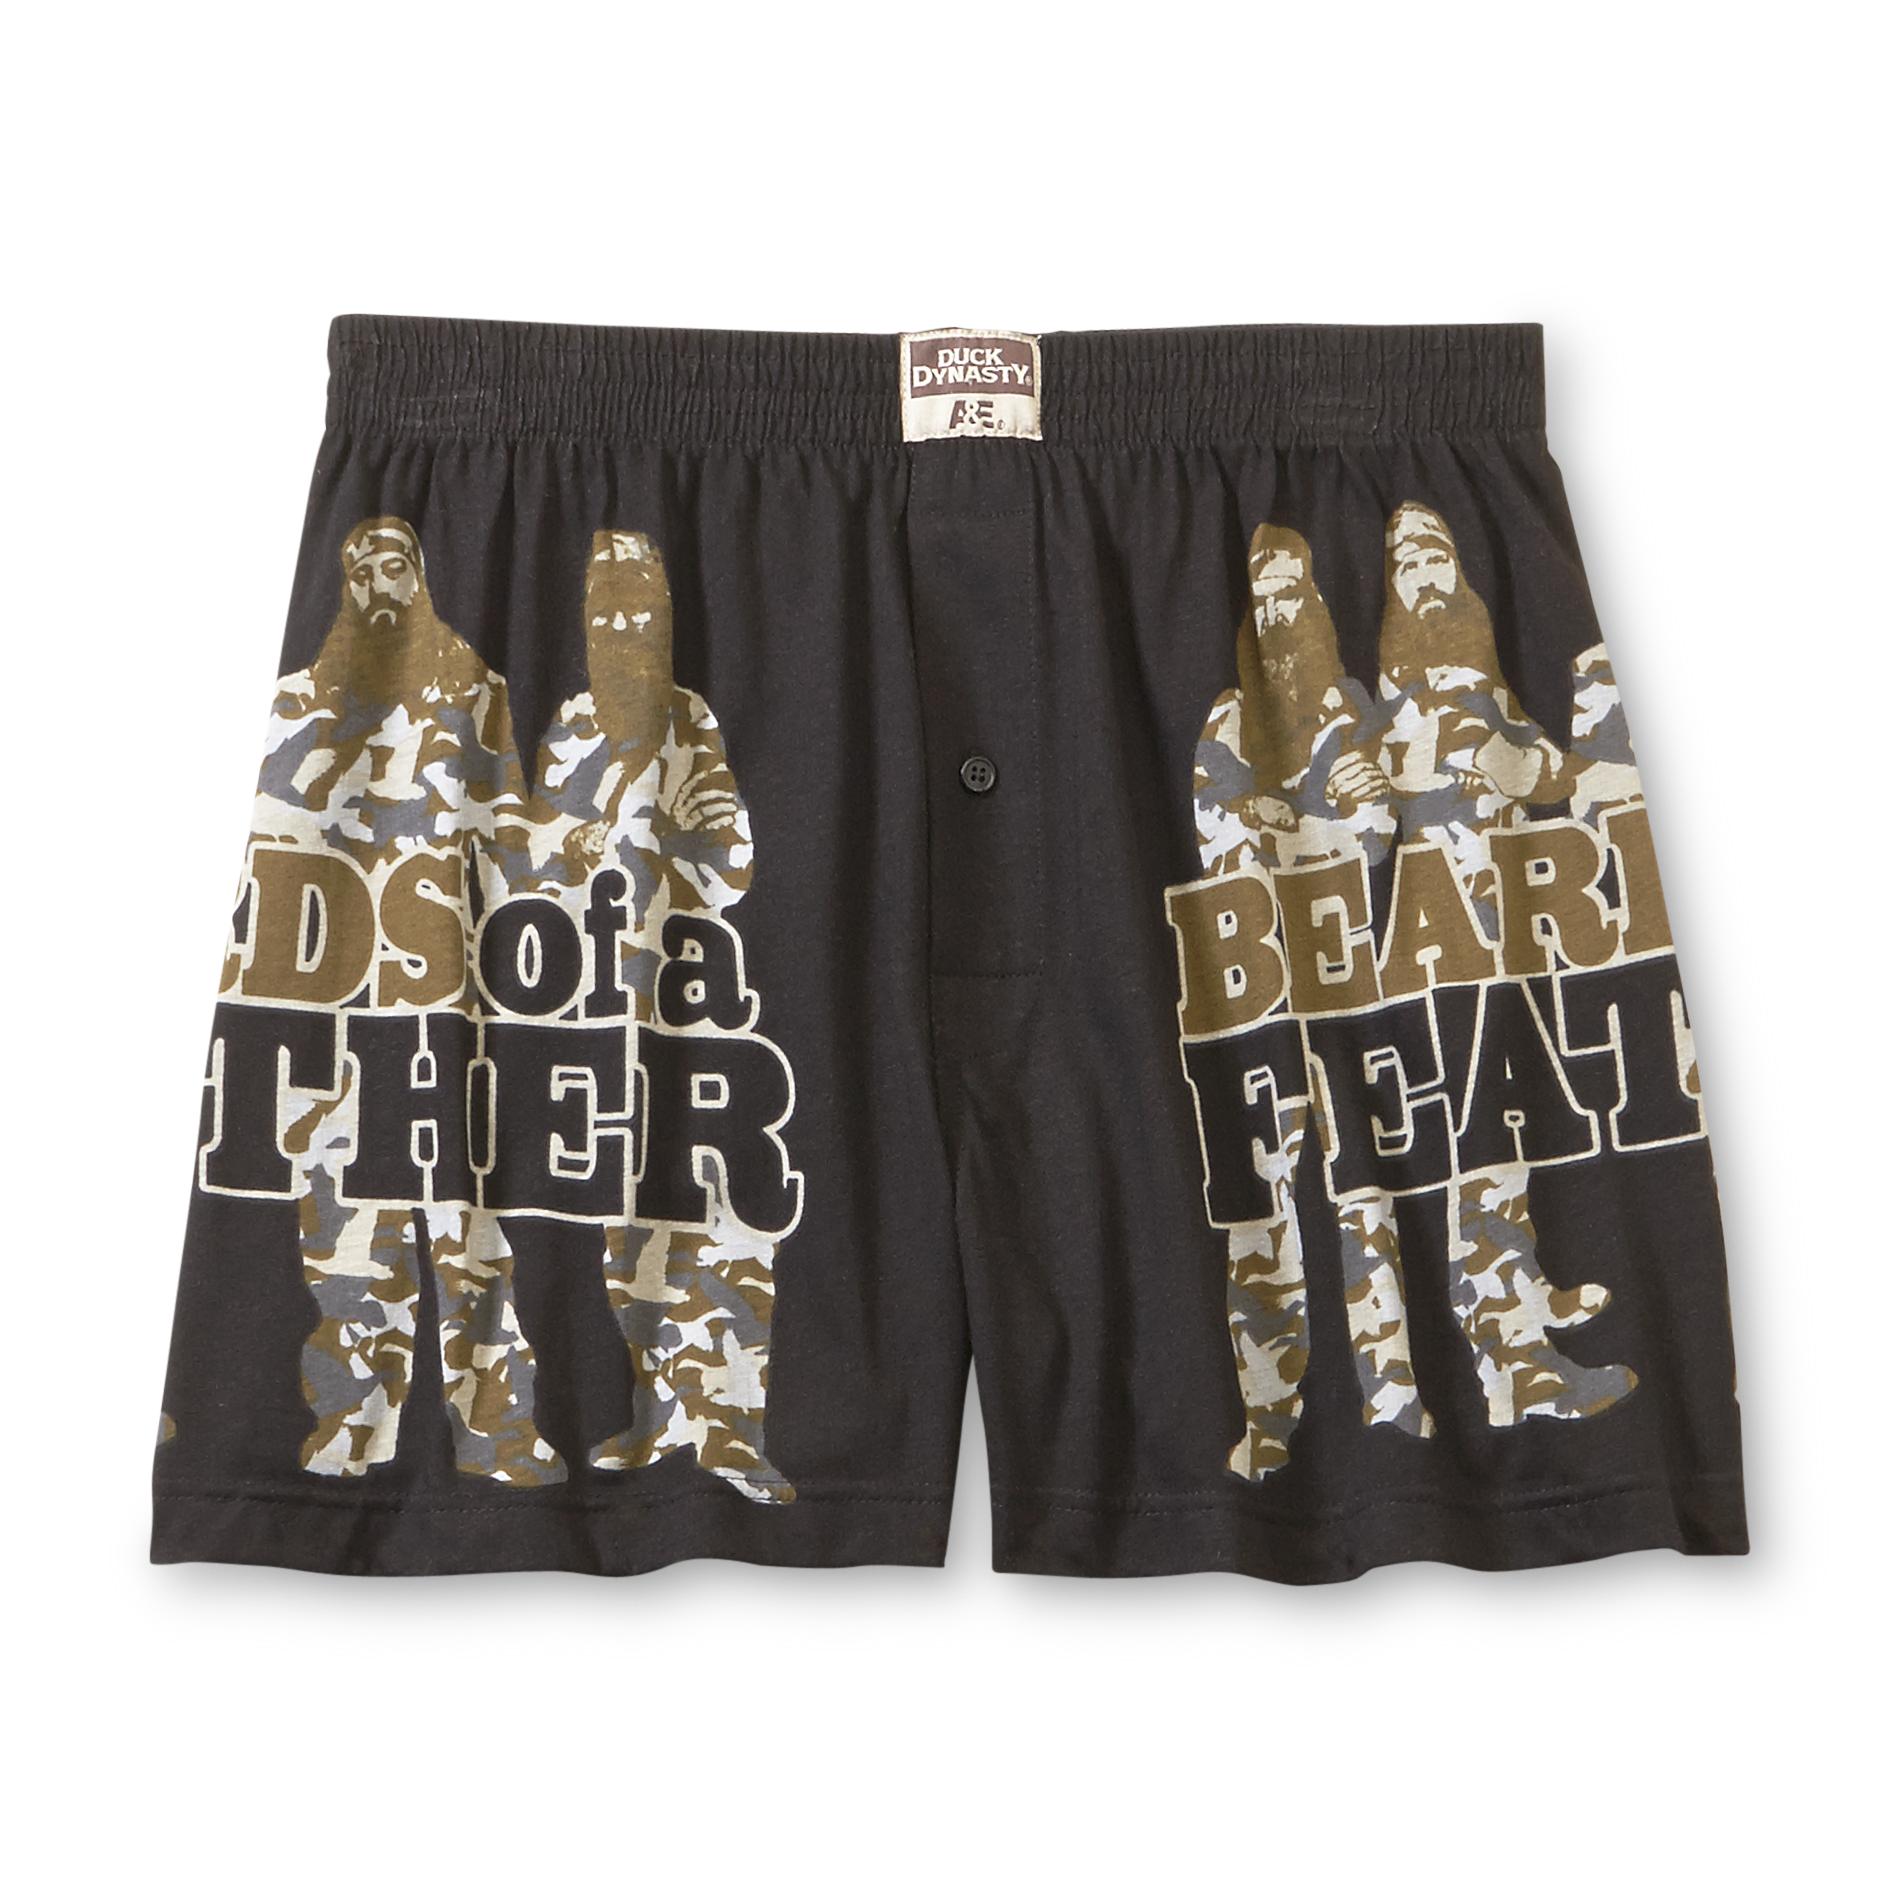 Duck Dynasty Men's Boxer Shorts - Beards Of A Feather